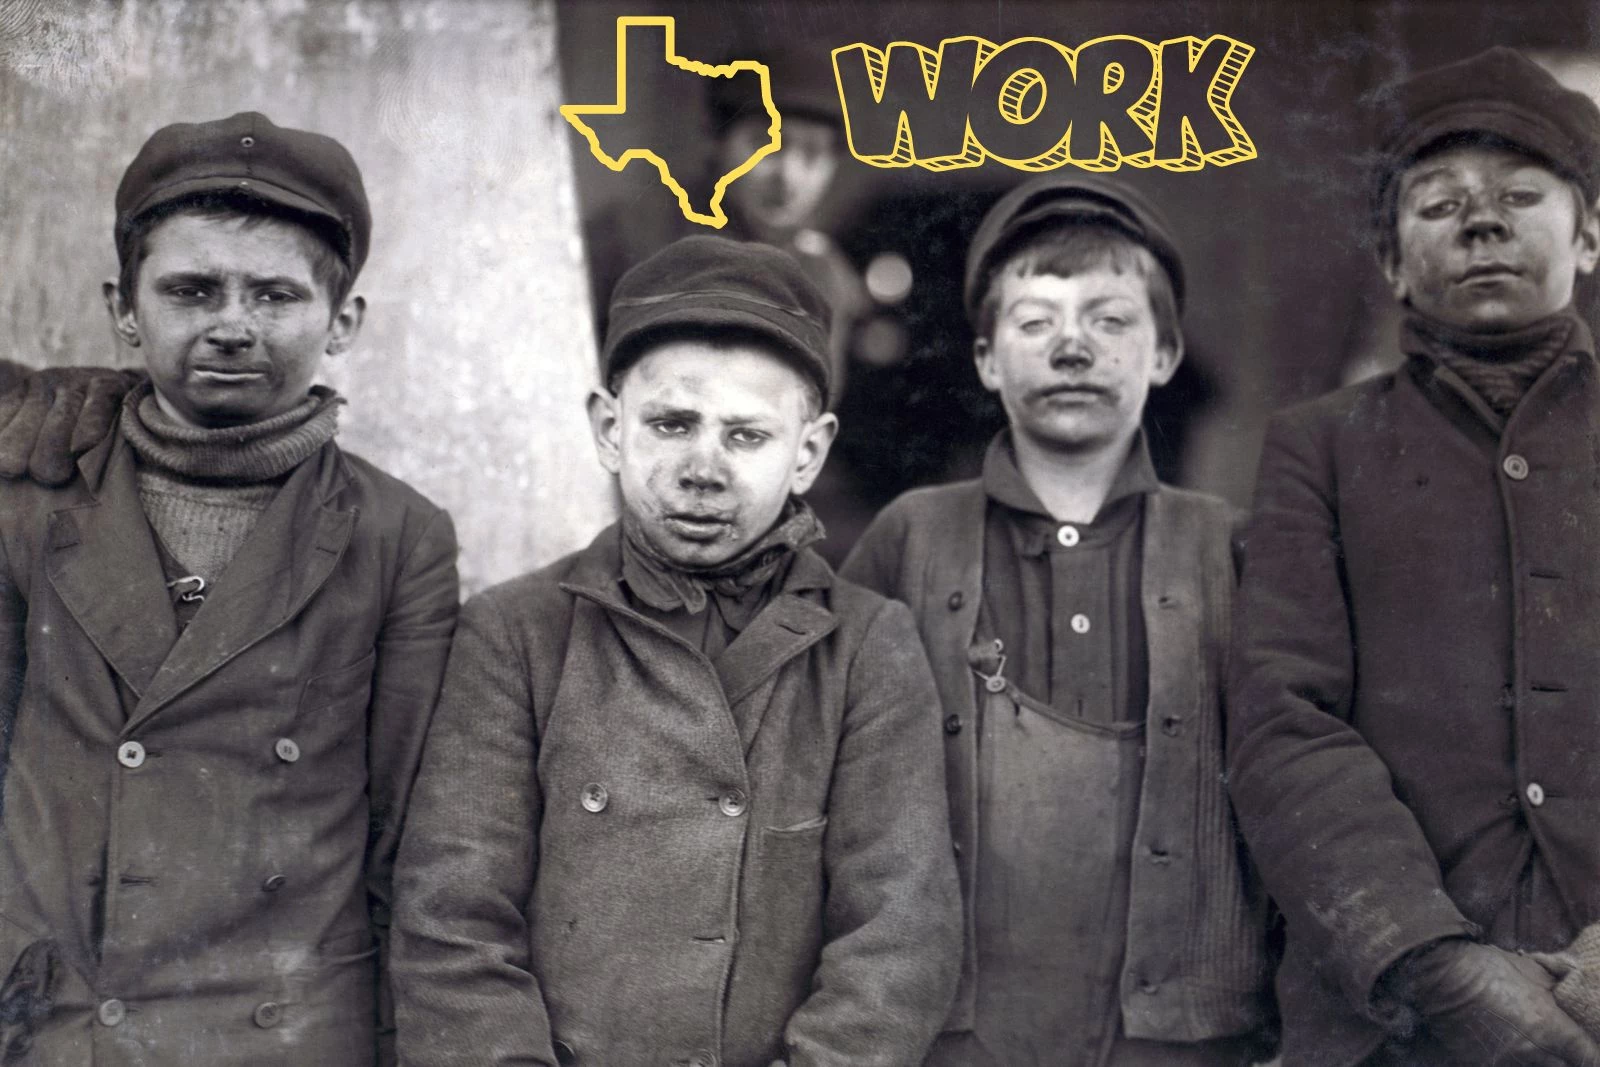 History: Most Common Jobs in Texas 150 Years Ago